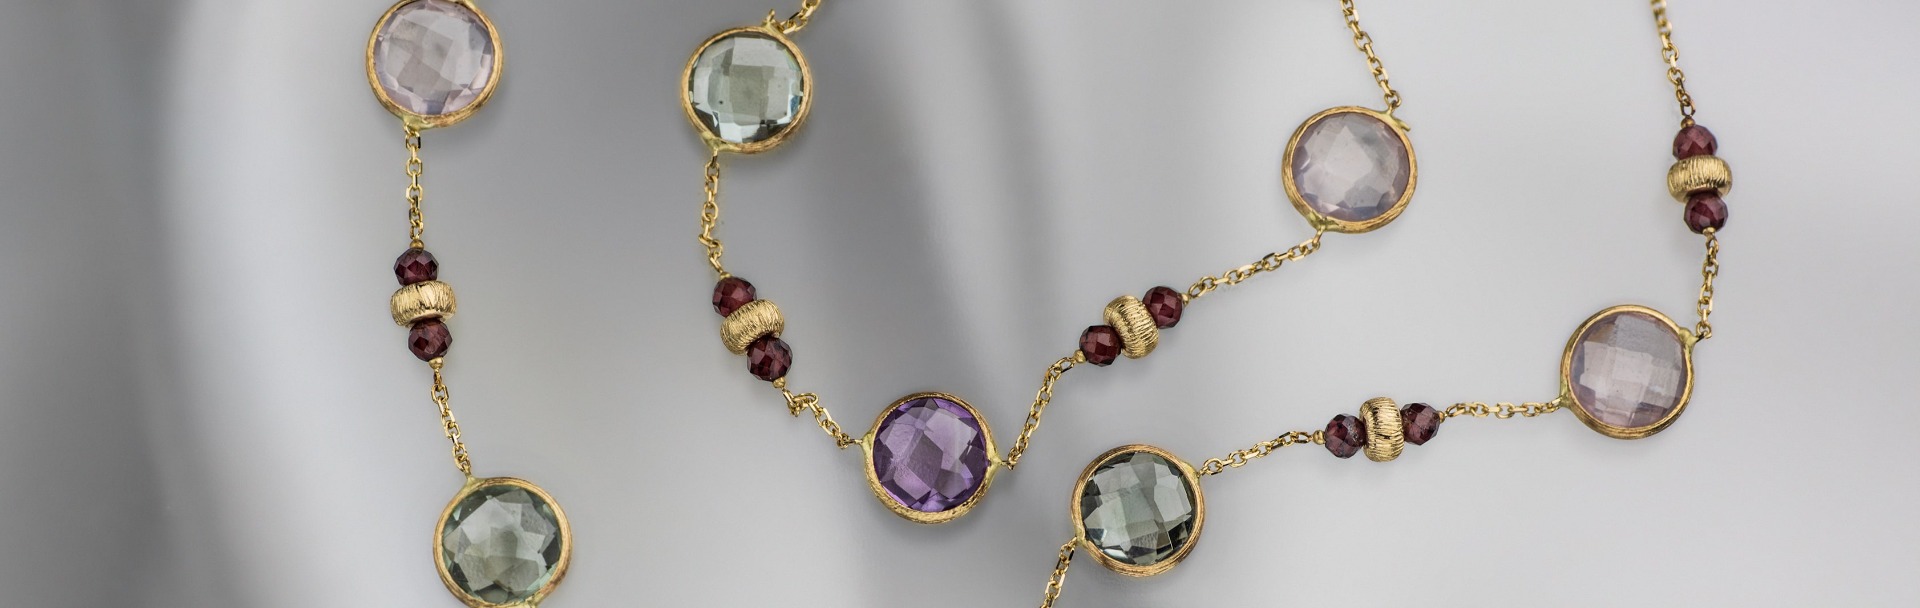 14K Gold Jewelry with Natural Gemstones 